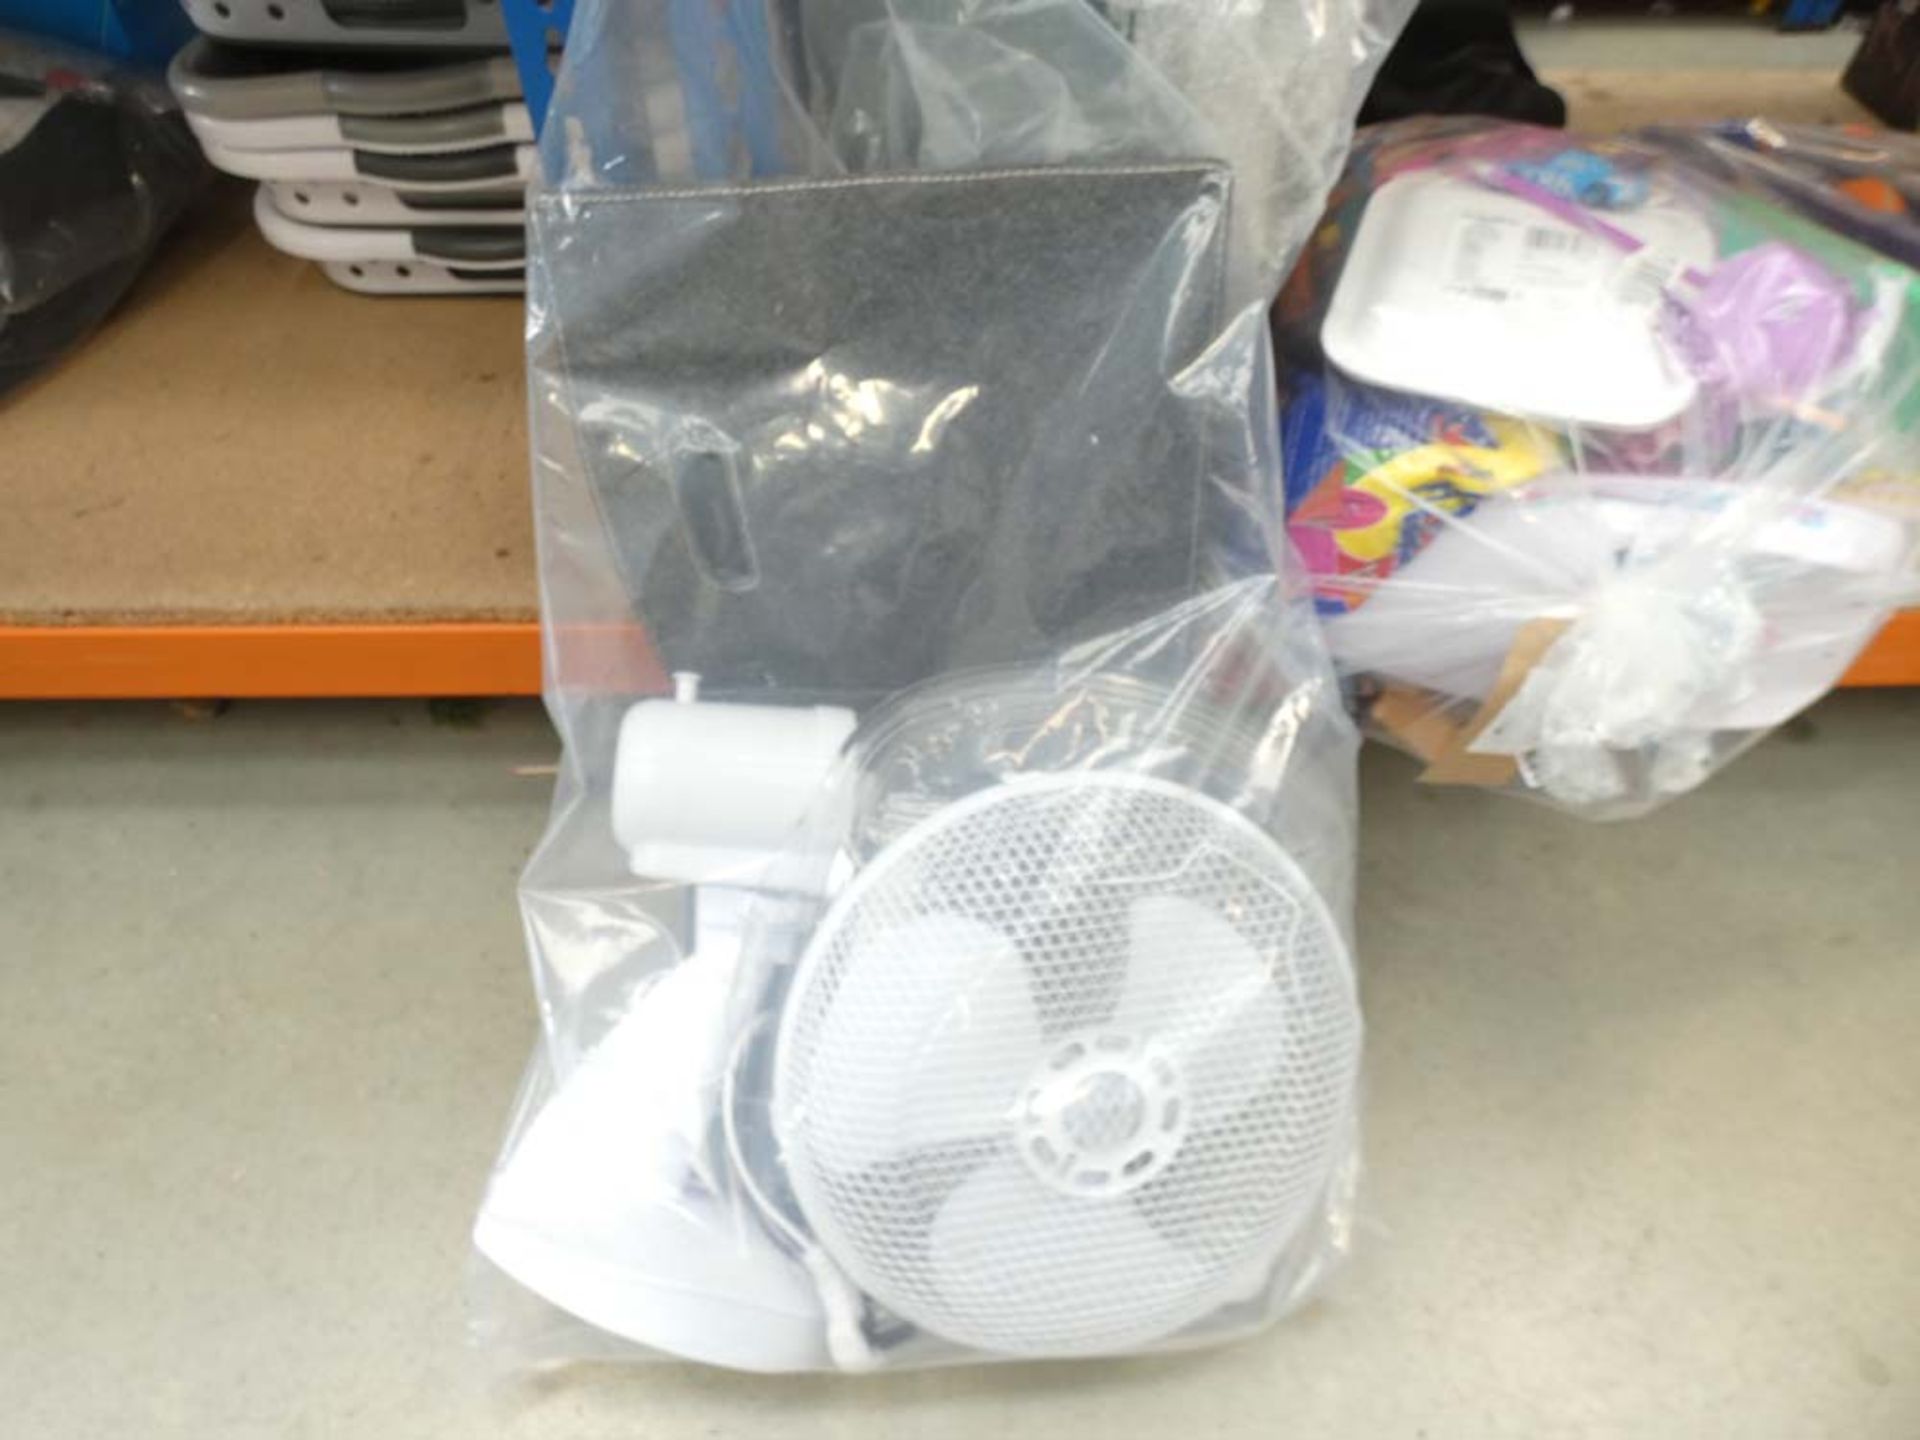 3562 Desk fan, fold up fabric storage box and tumble dryer water container